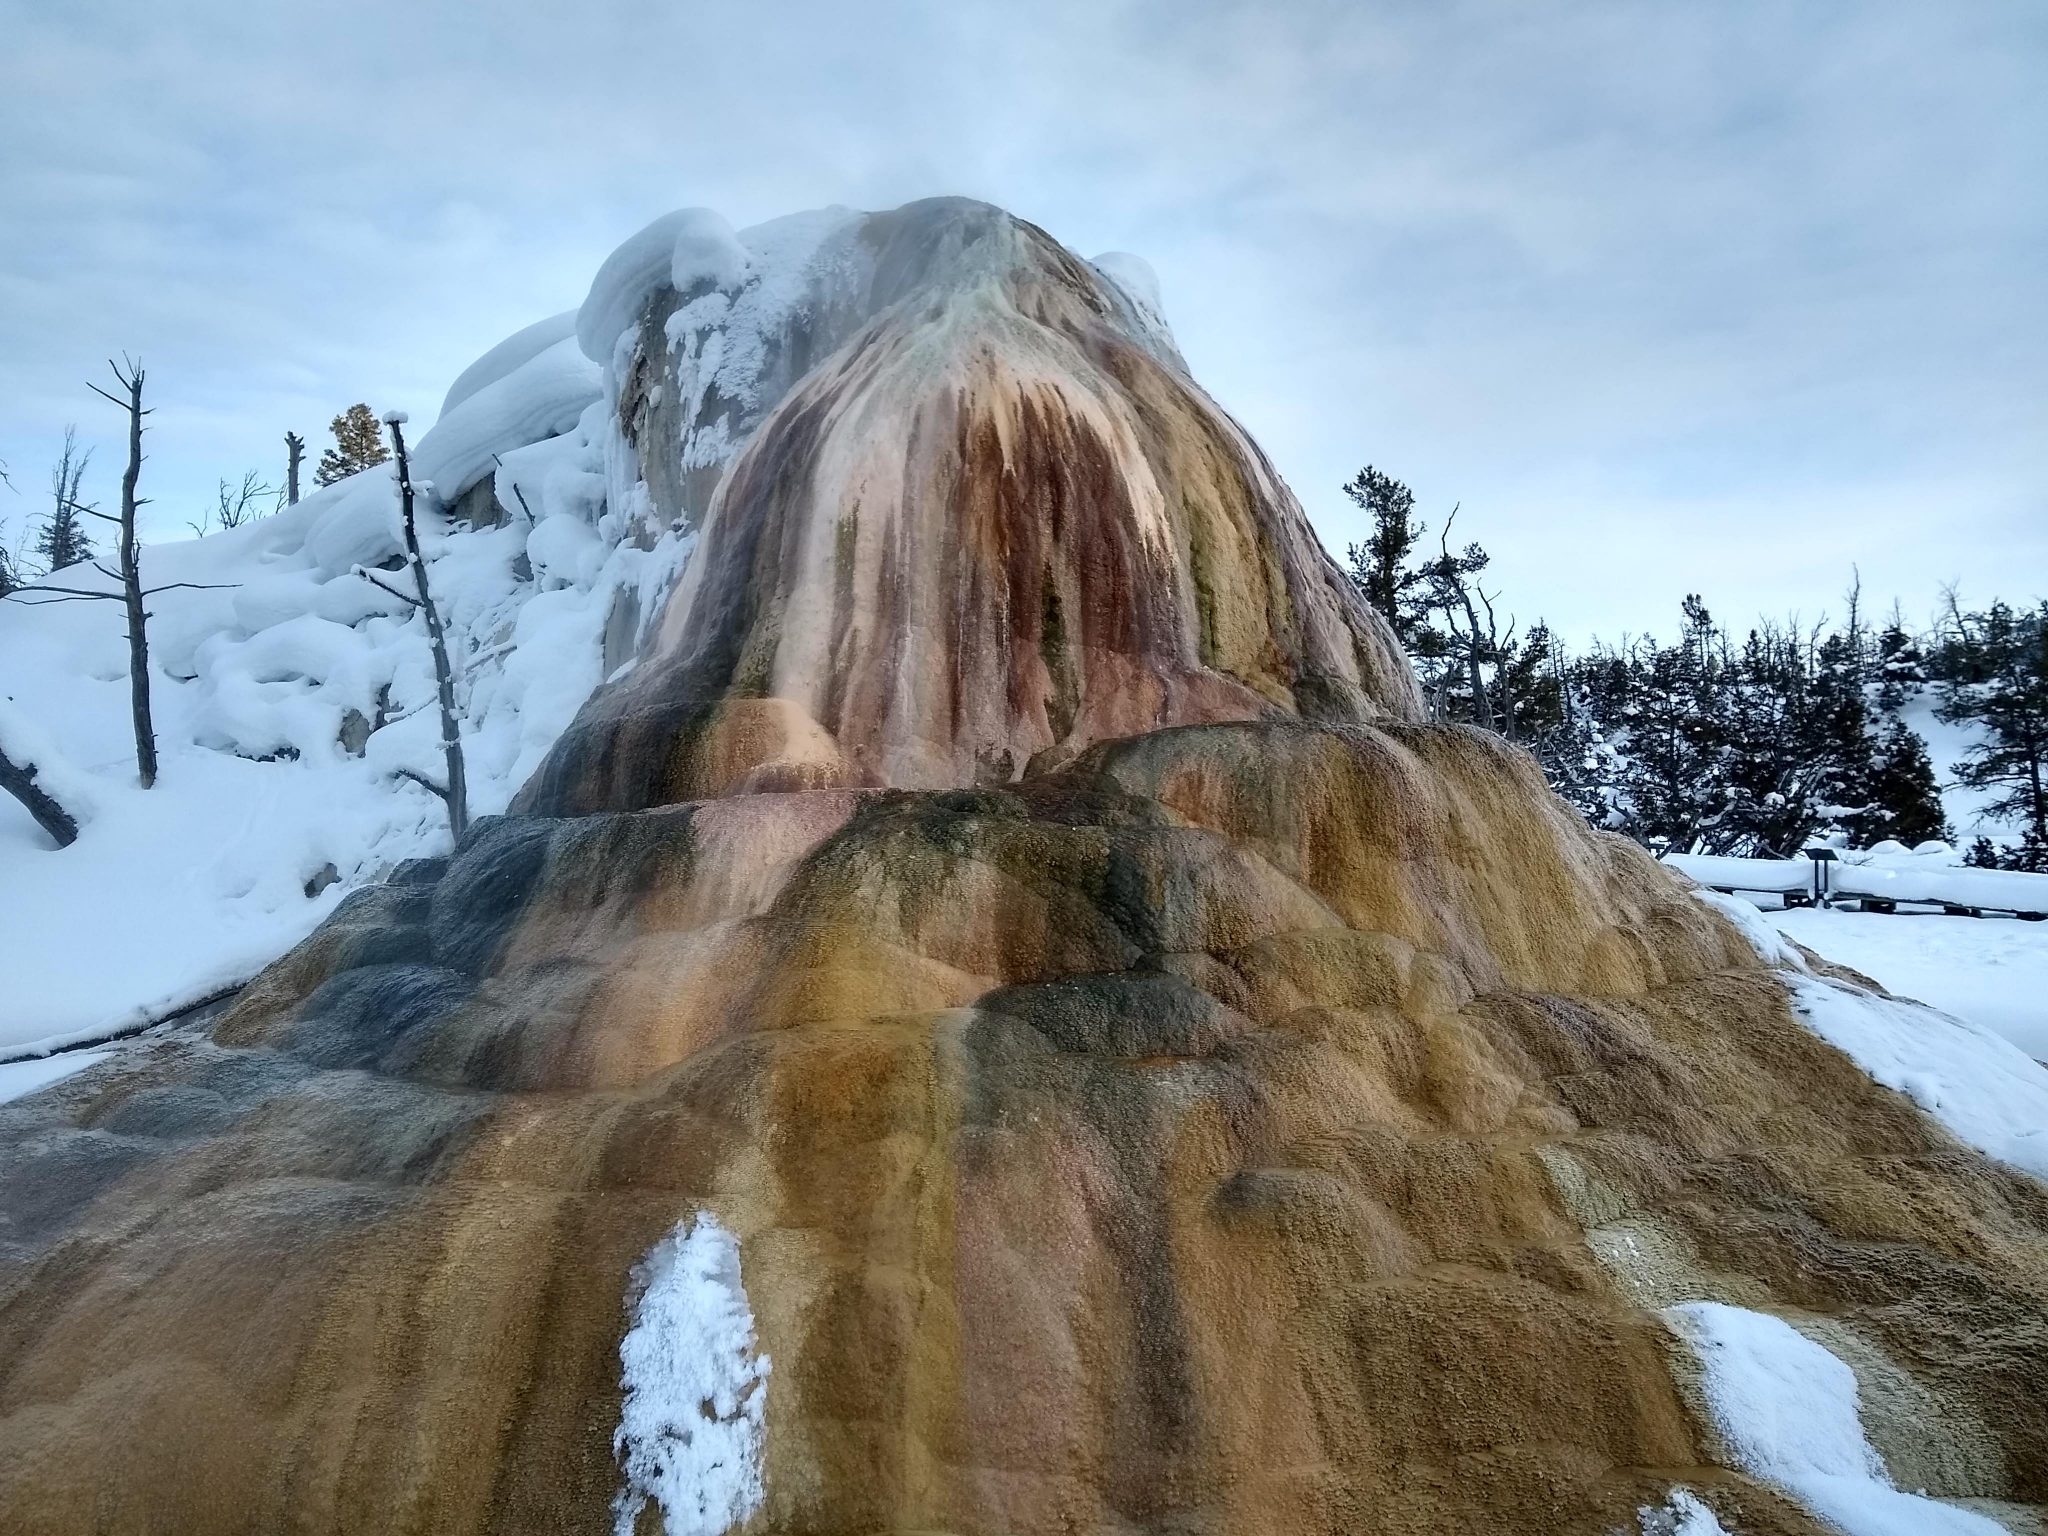 A hot spring in a large mound partially covered in snow